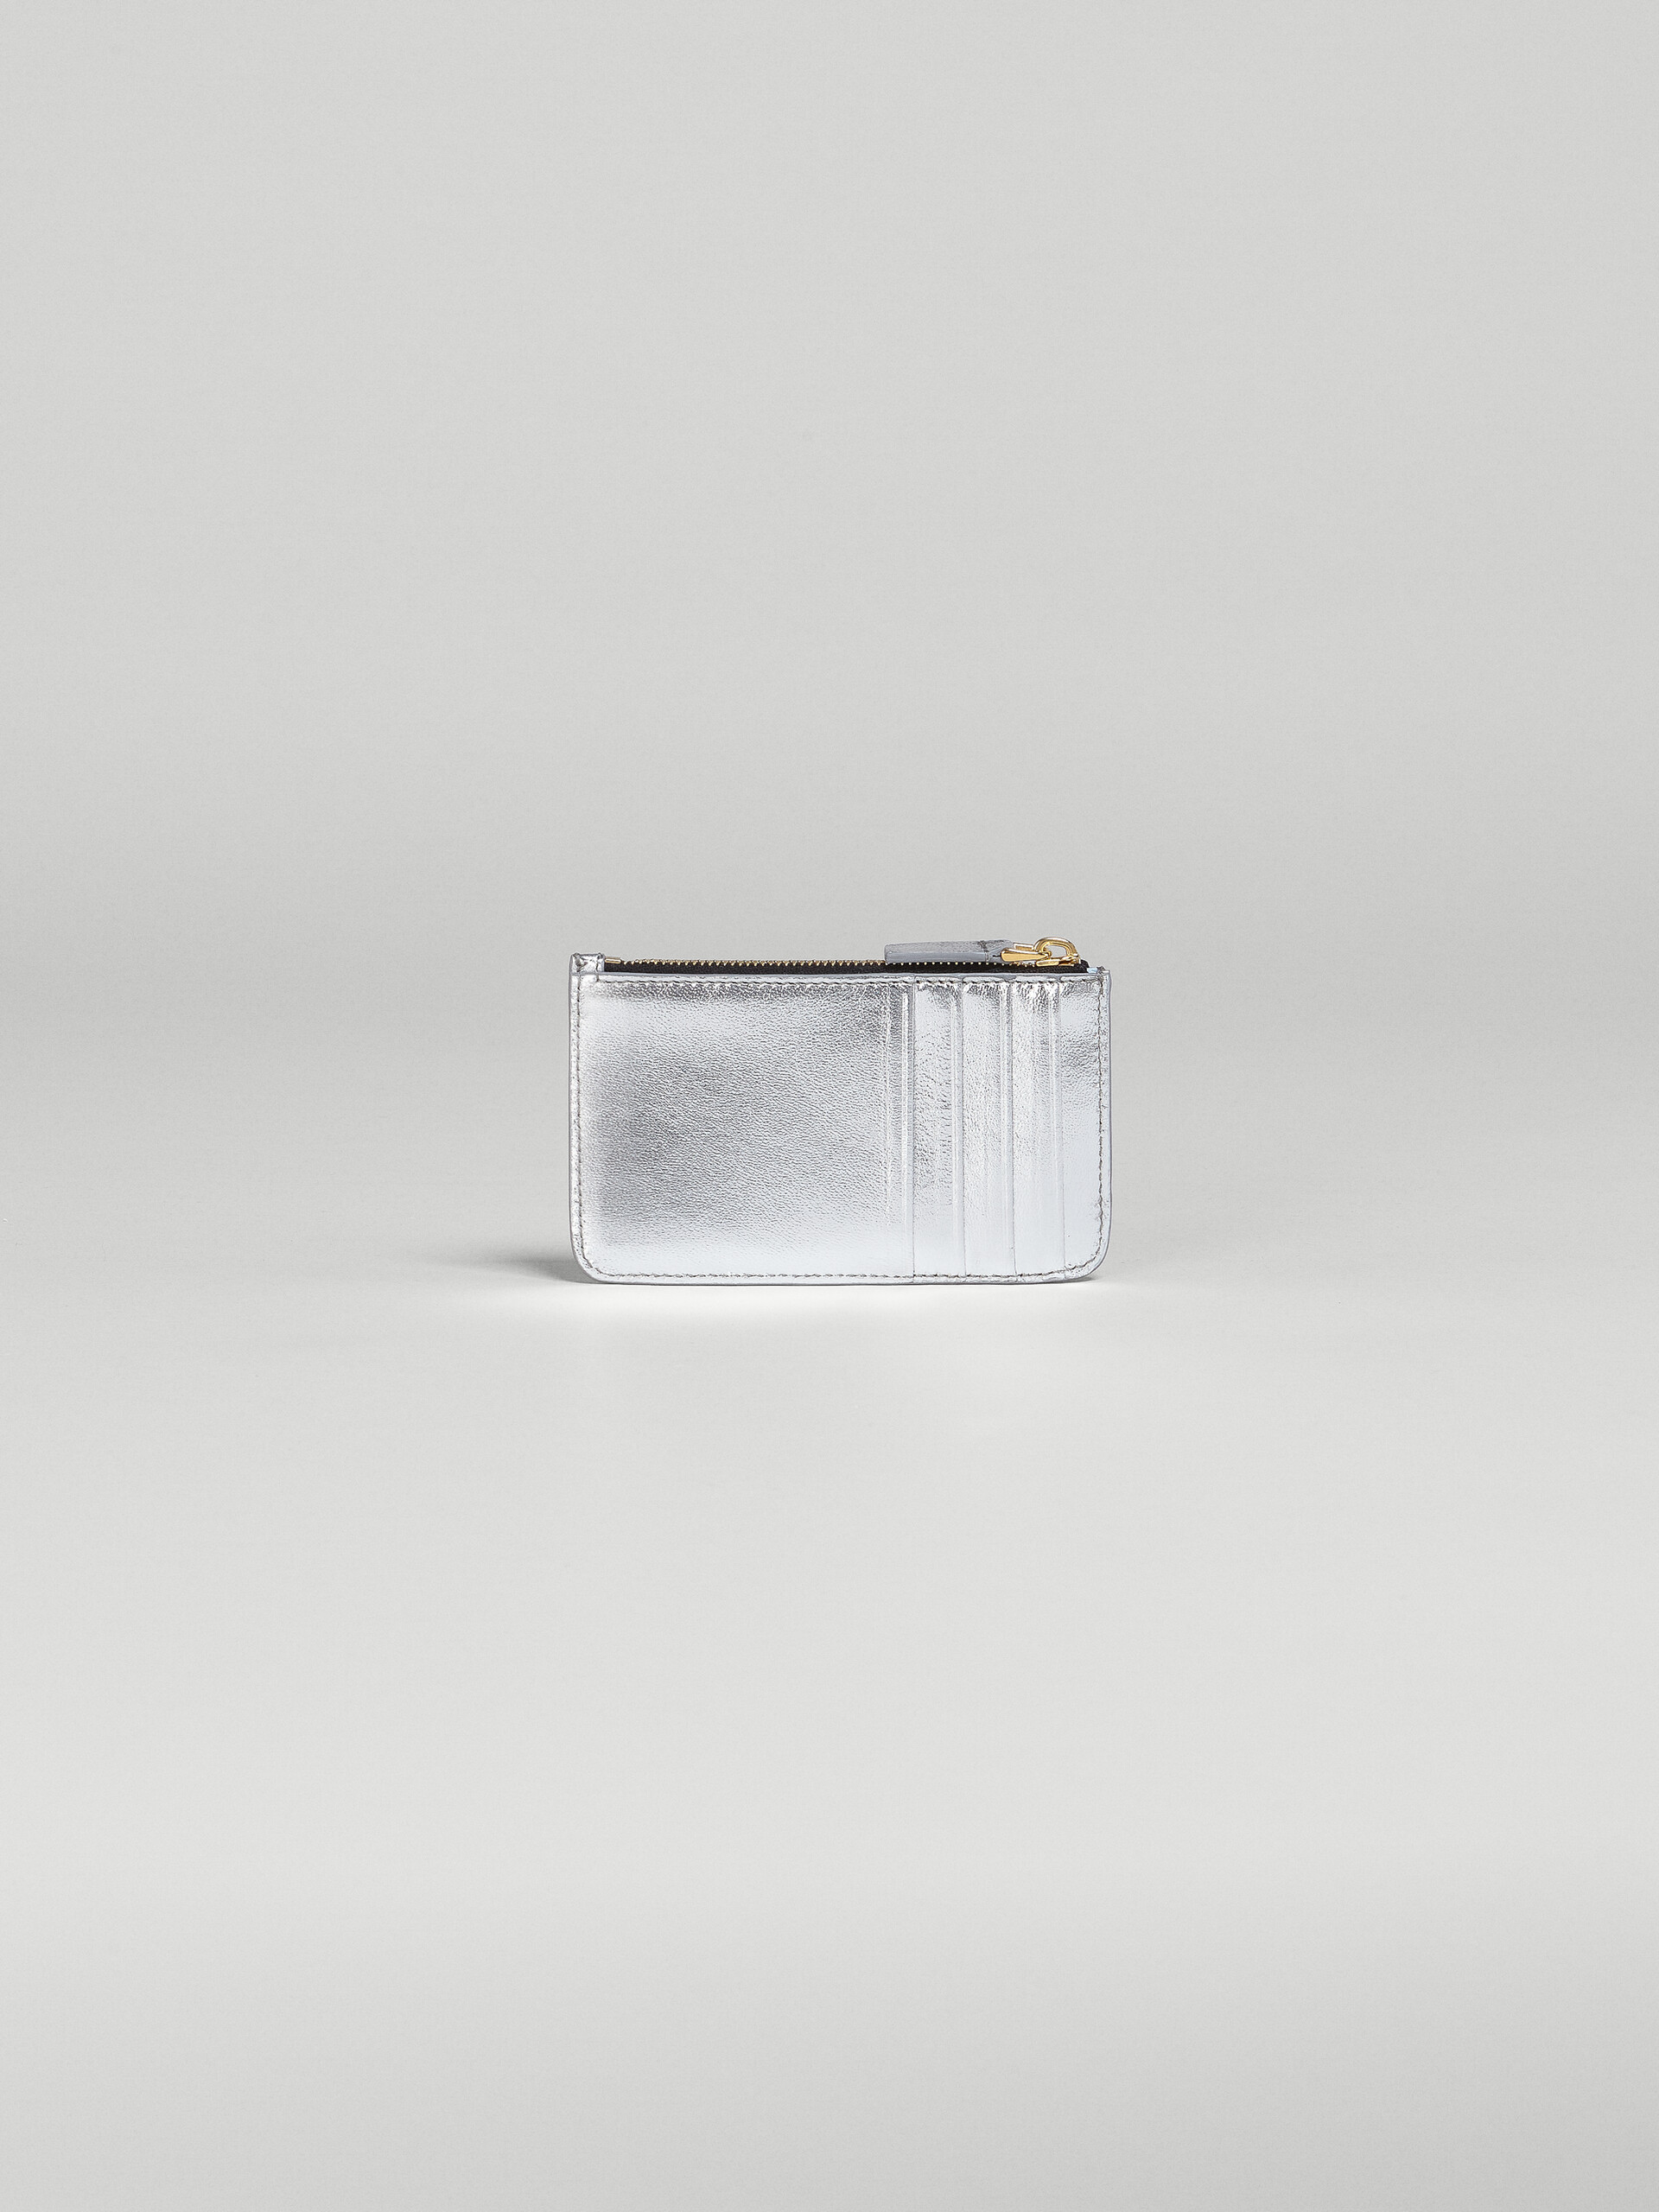 Silver metallic nappa leather card case - Wallets - Image 3